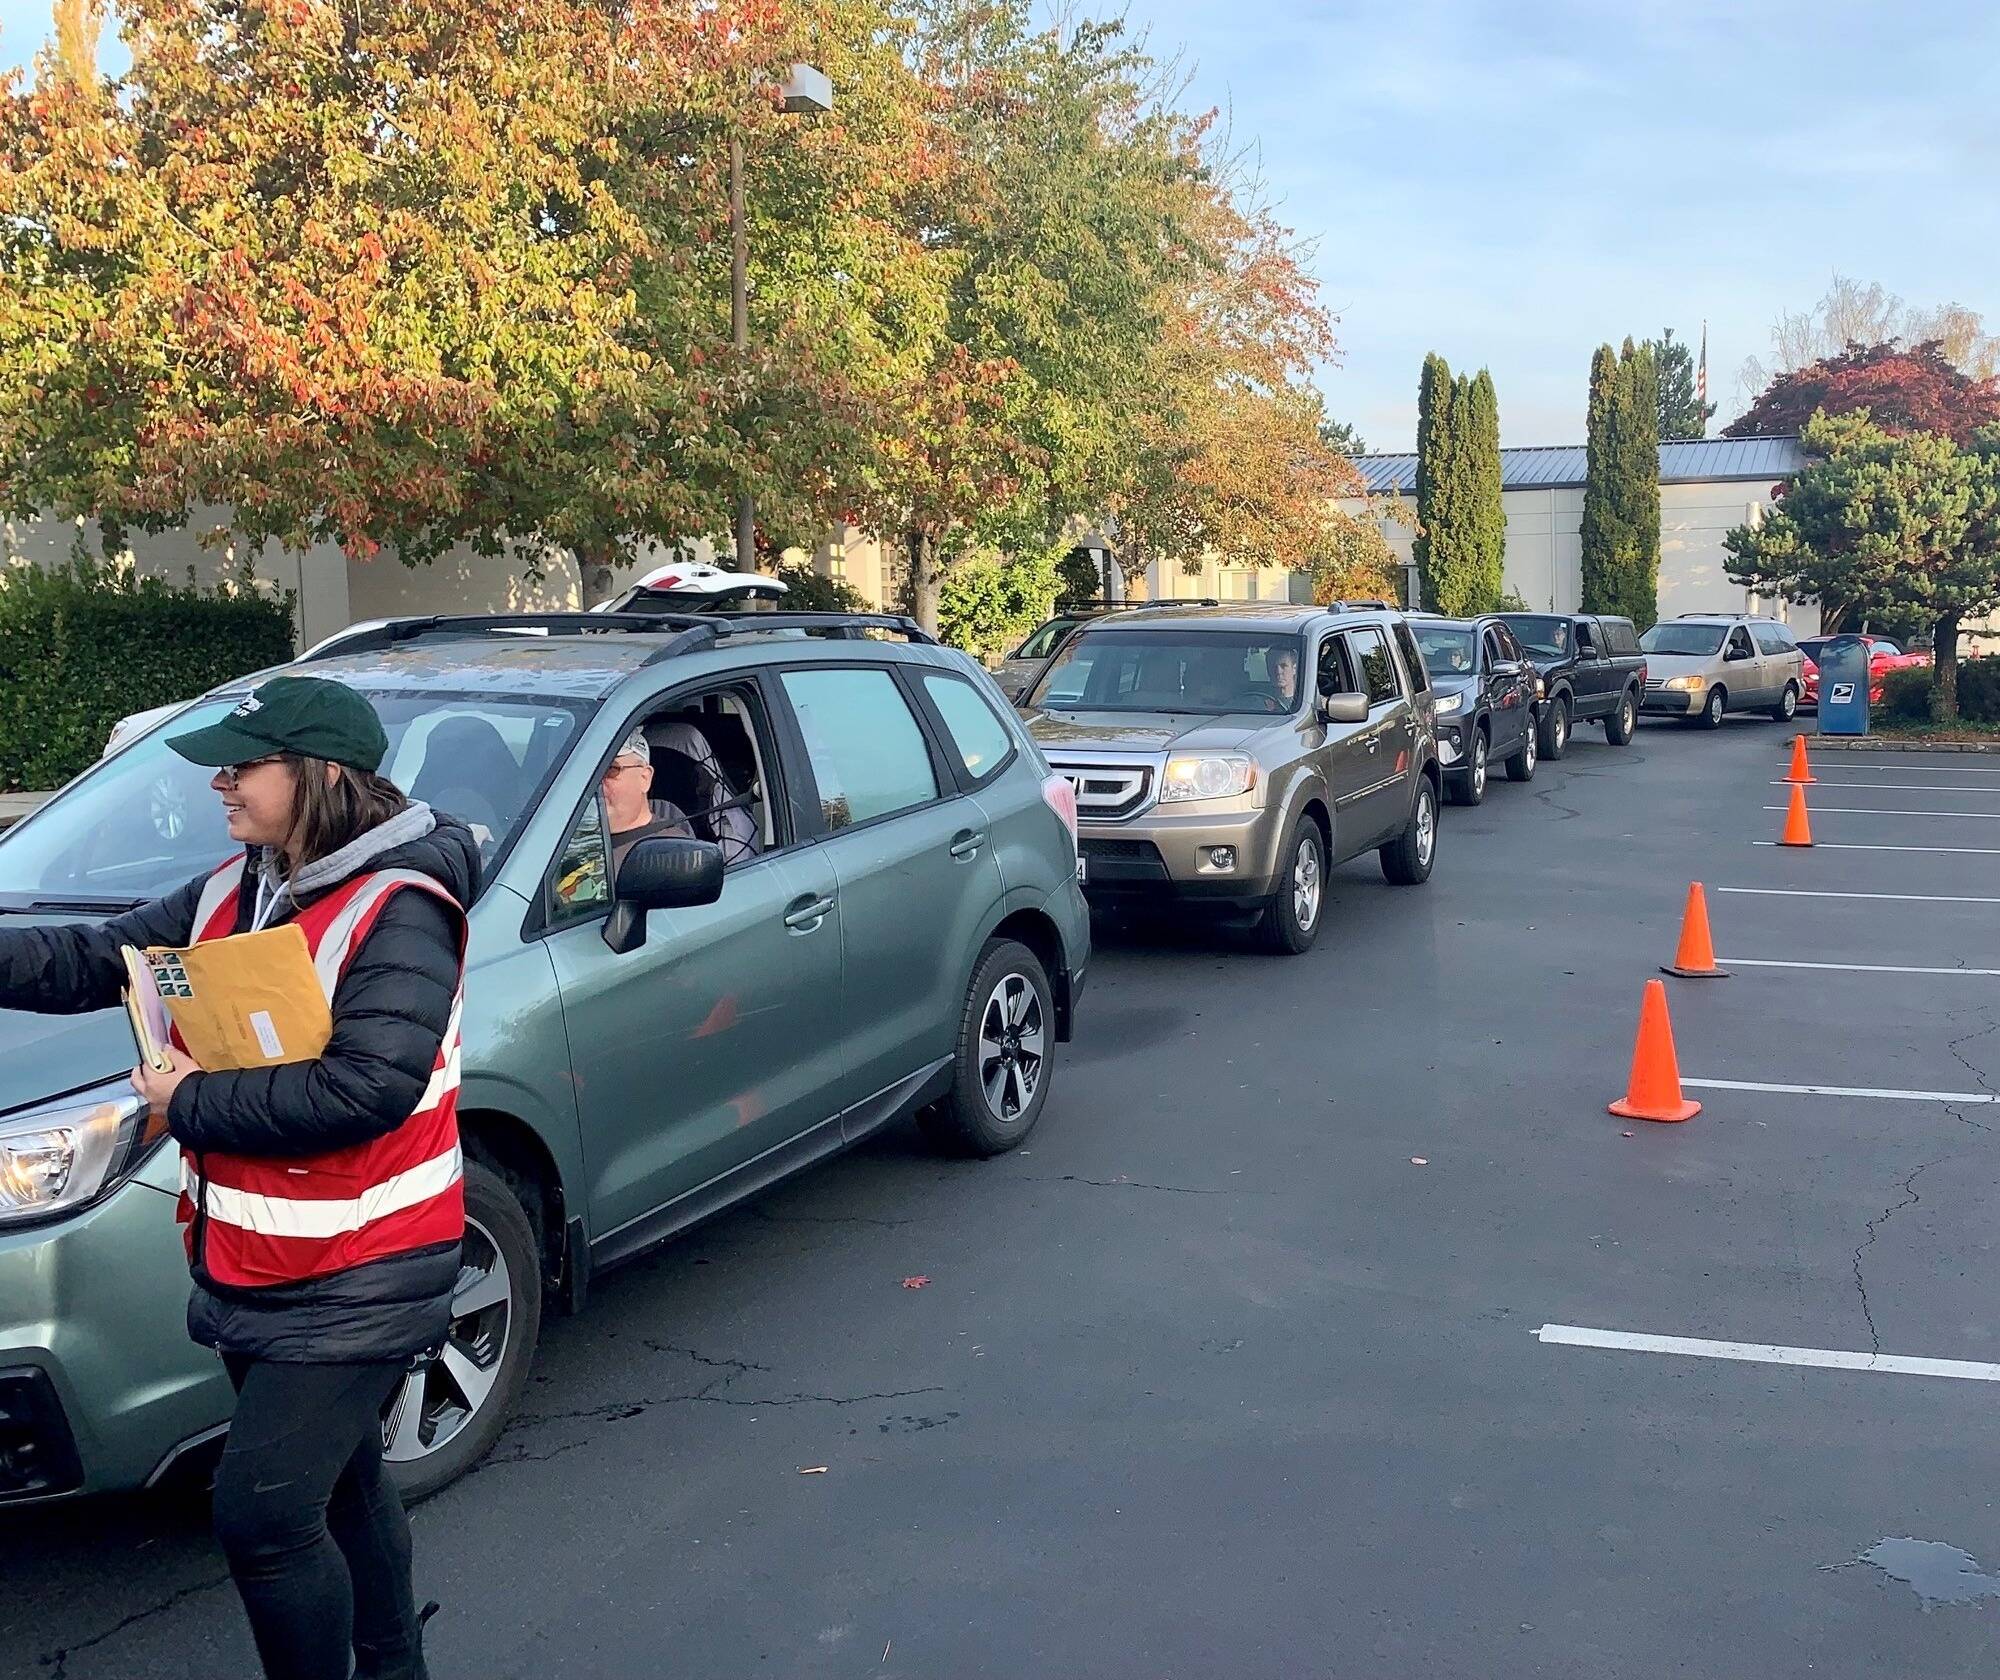 Vehicles line up at the city’s annual fall recycling collection event on Oct. 29 in the city hall parking lot. Photo courtesy of the city of Mercer Island